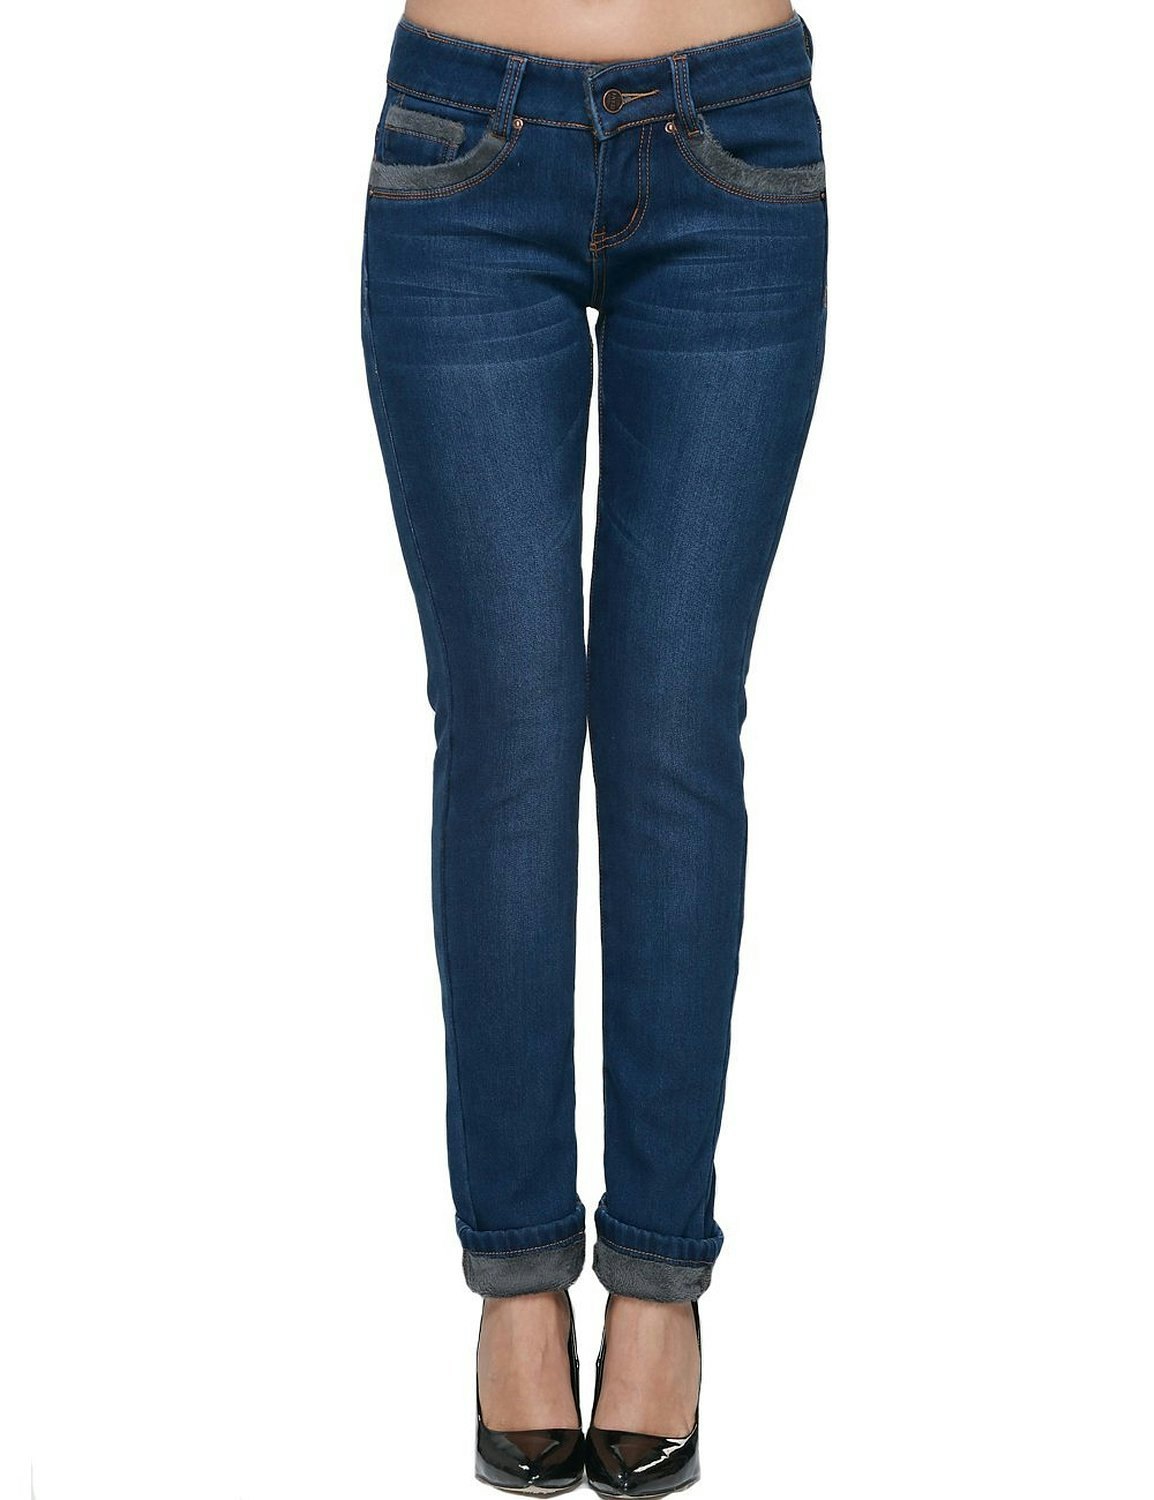 ladies thermal lined jeans